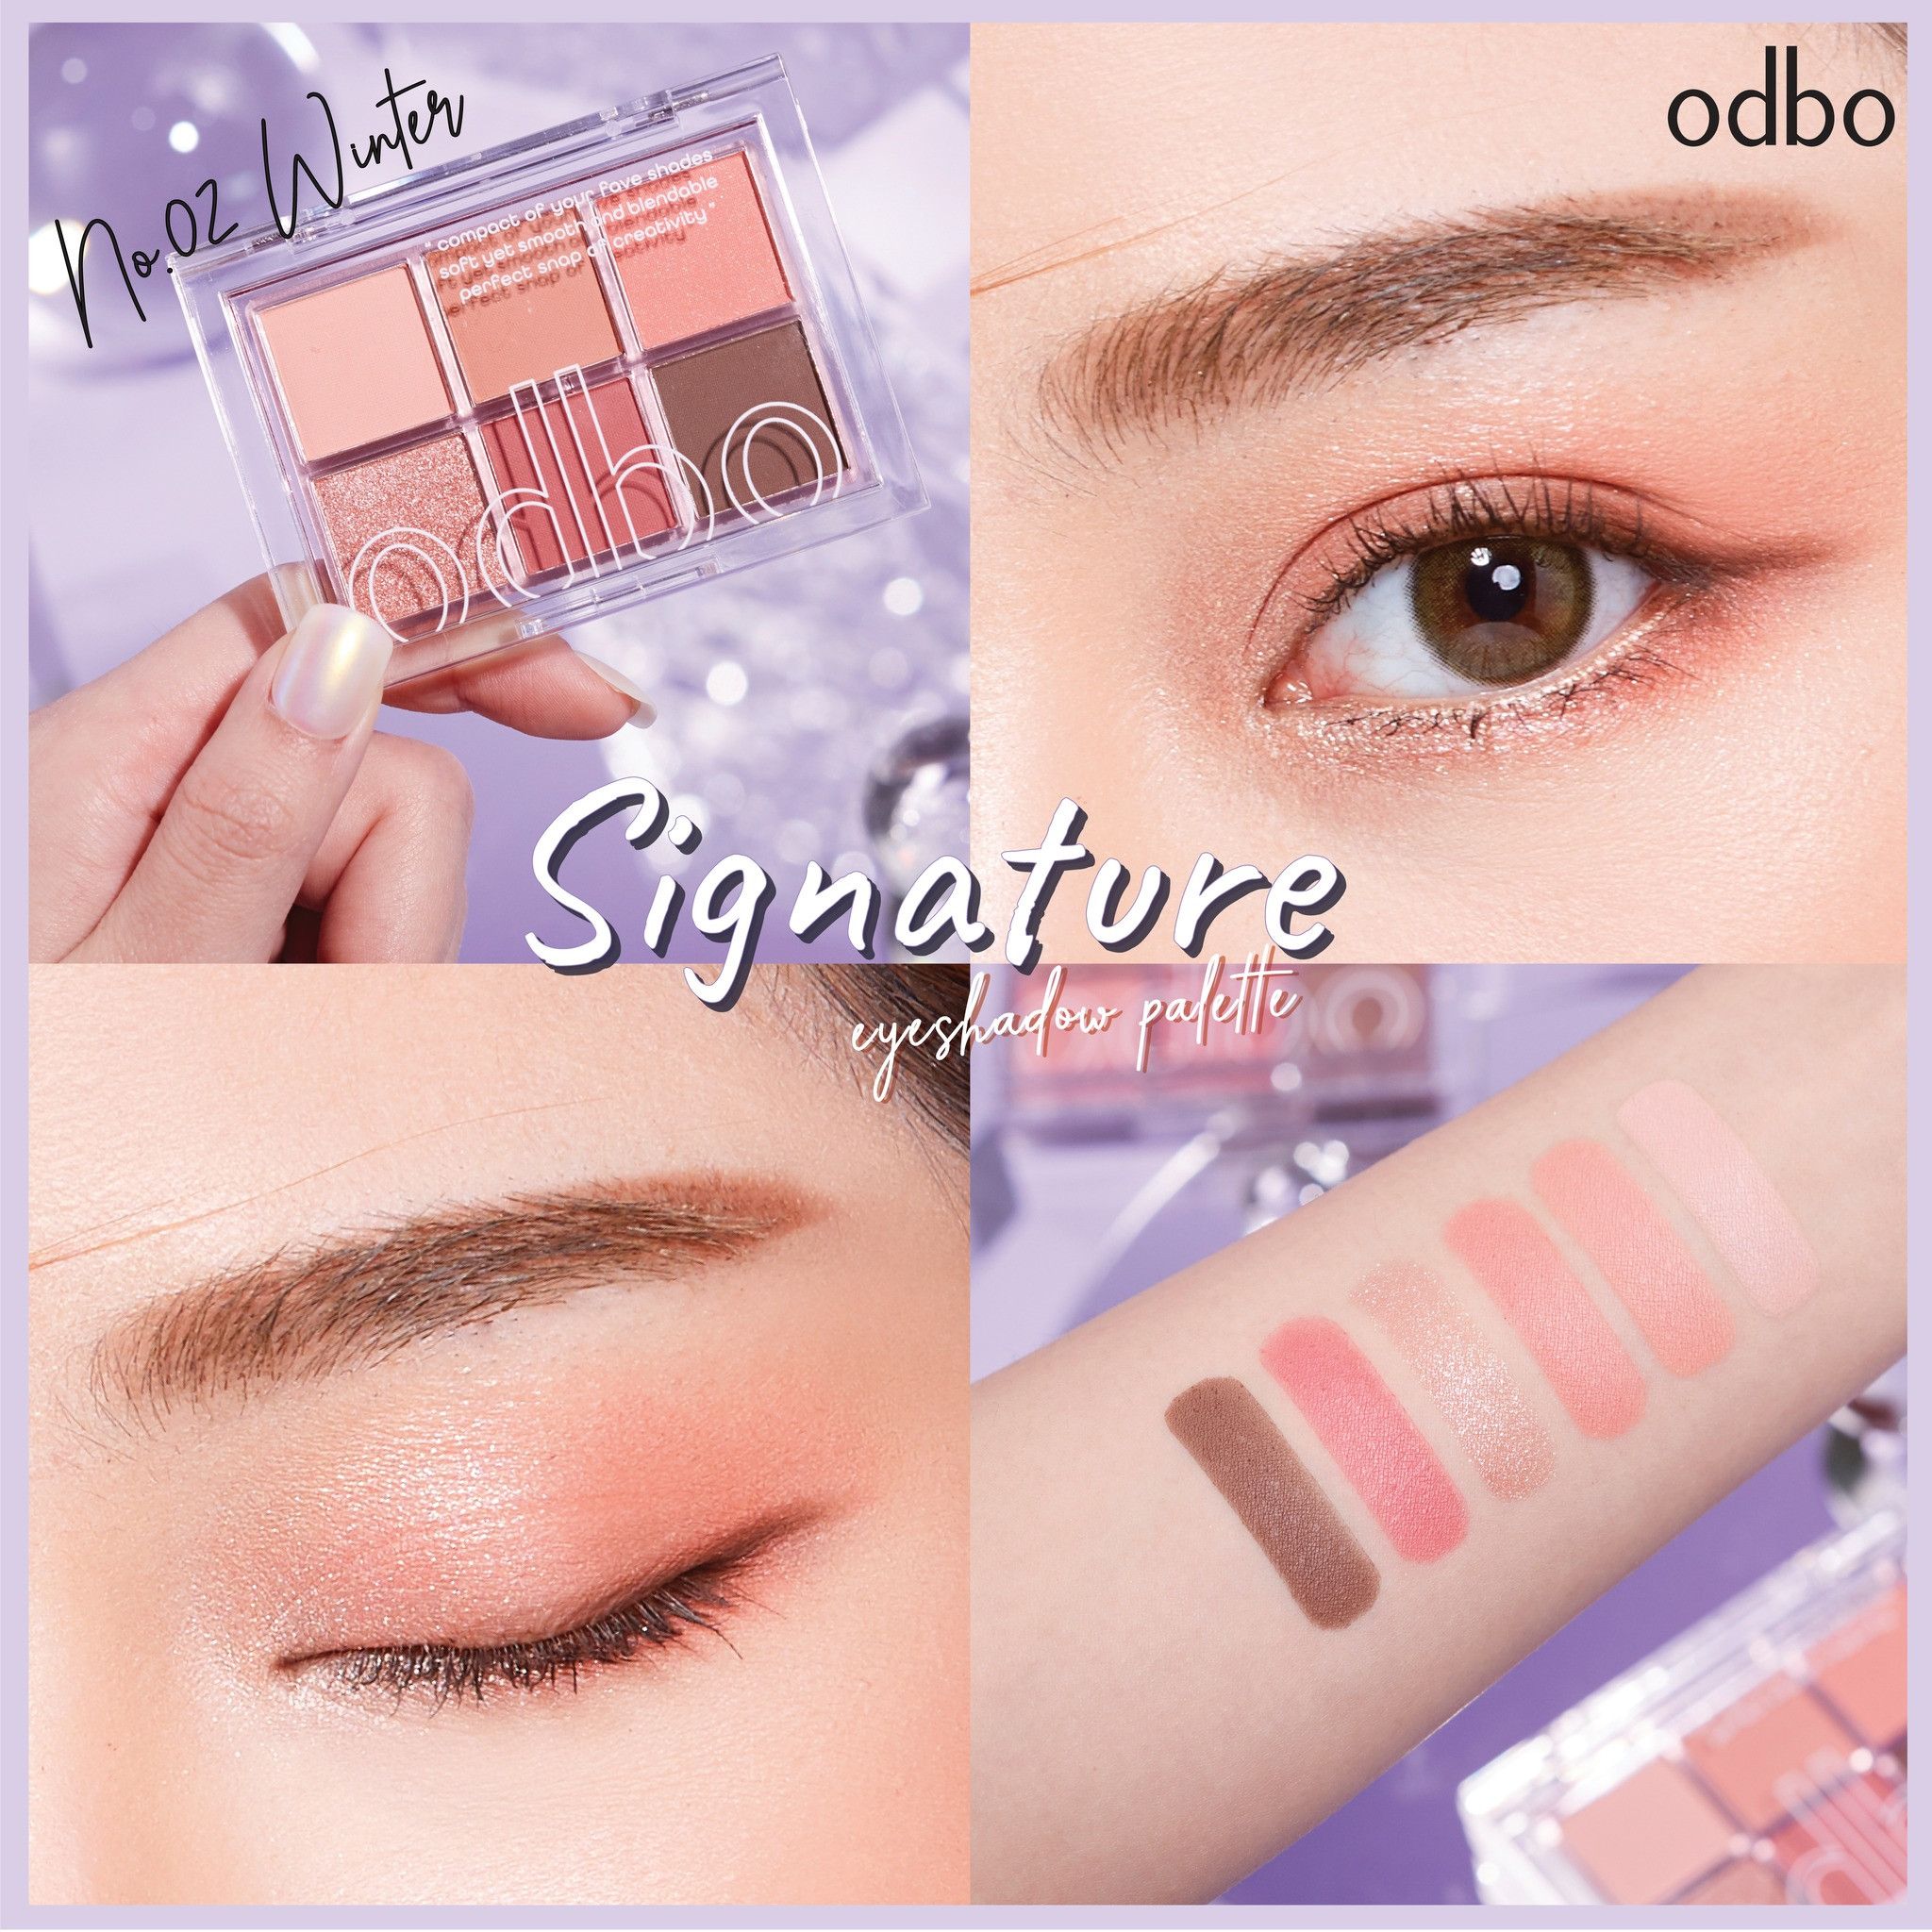  #OD276 SIGNATURE PHẤN MẮT 6 Ô HỘP TRONG SUỐT ODBO 